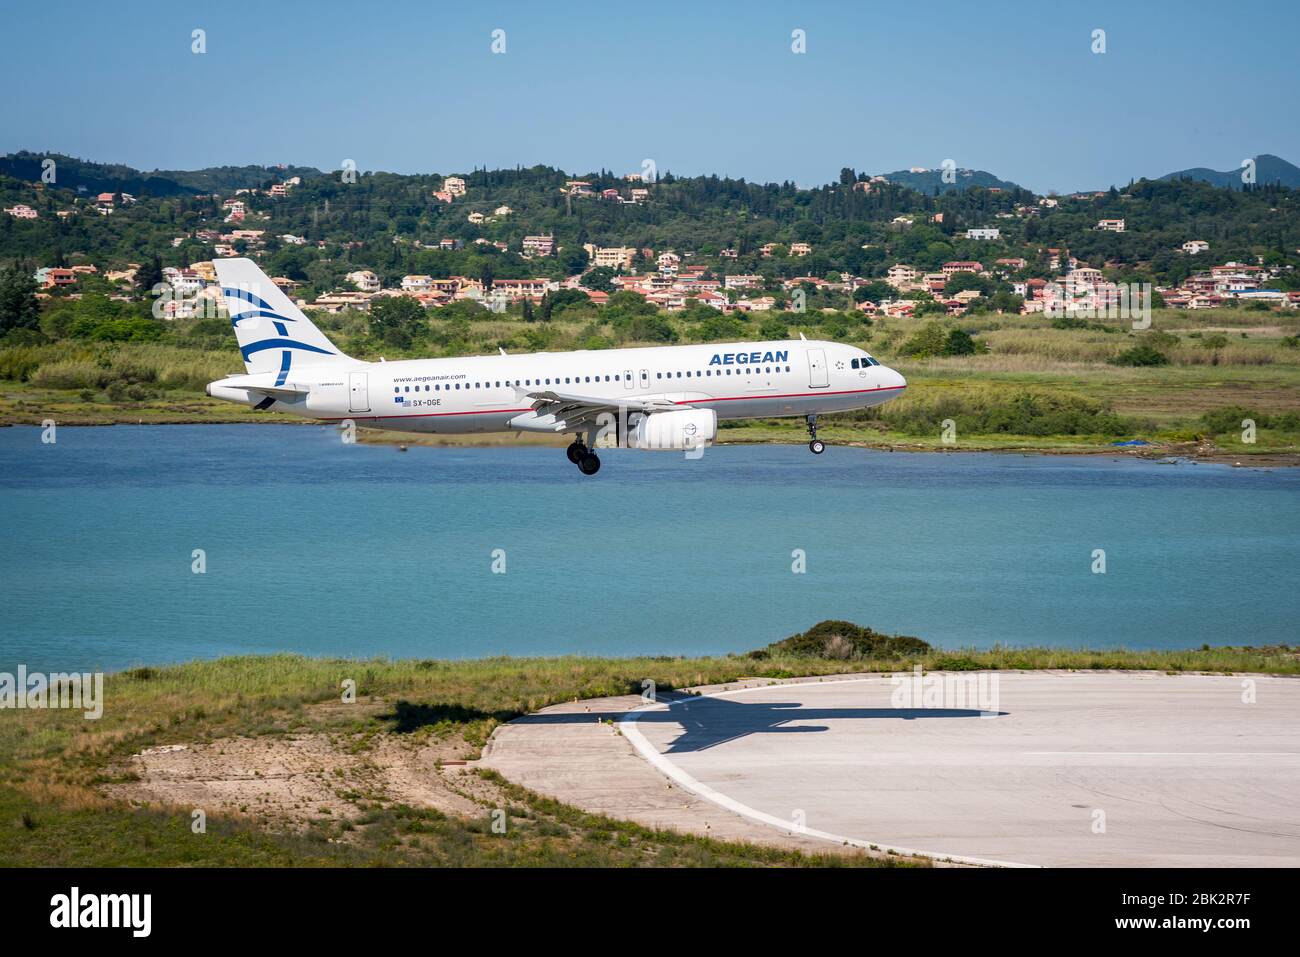 Aegean Airlines Airbus A320 aeroplane coming in to land at Corfu International Airport. Stock Photo